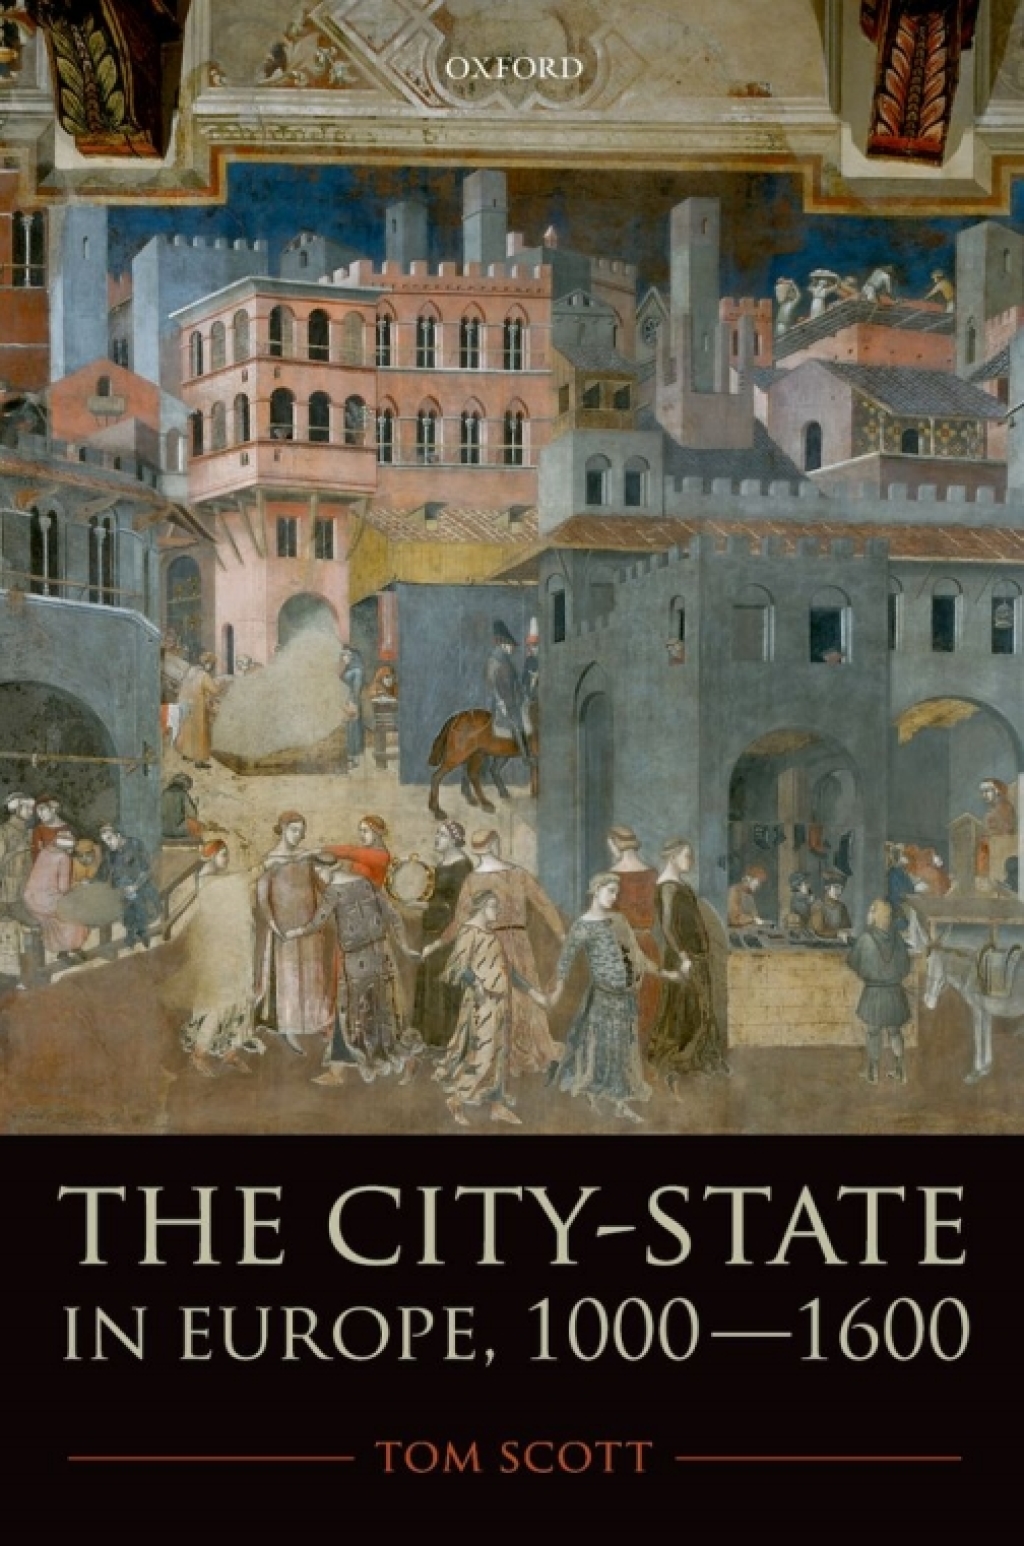 The City-State in Europe  1000-1600 (eBook Rental)